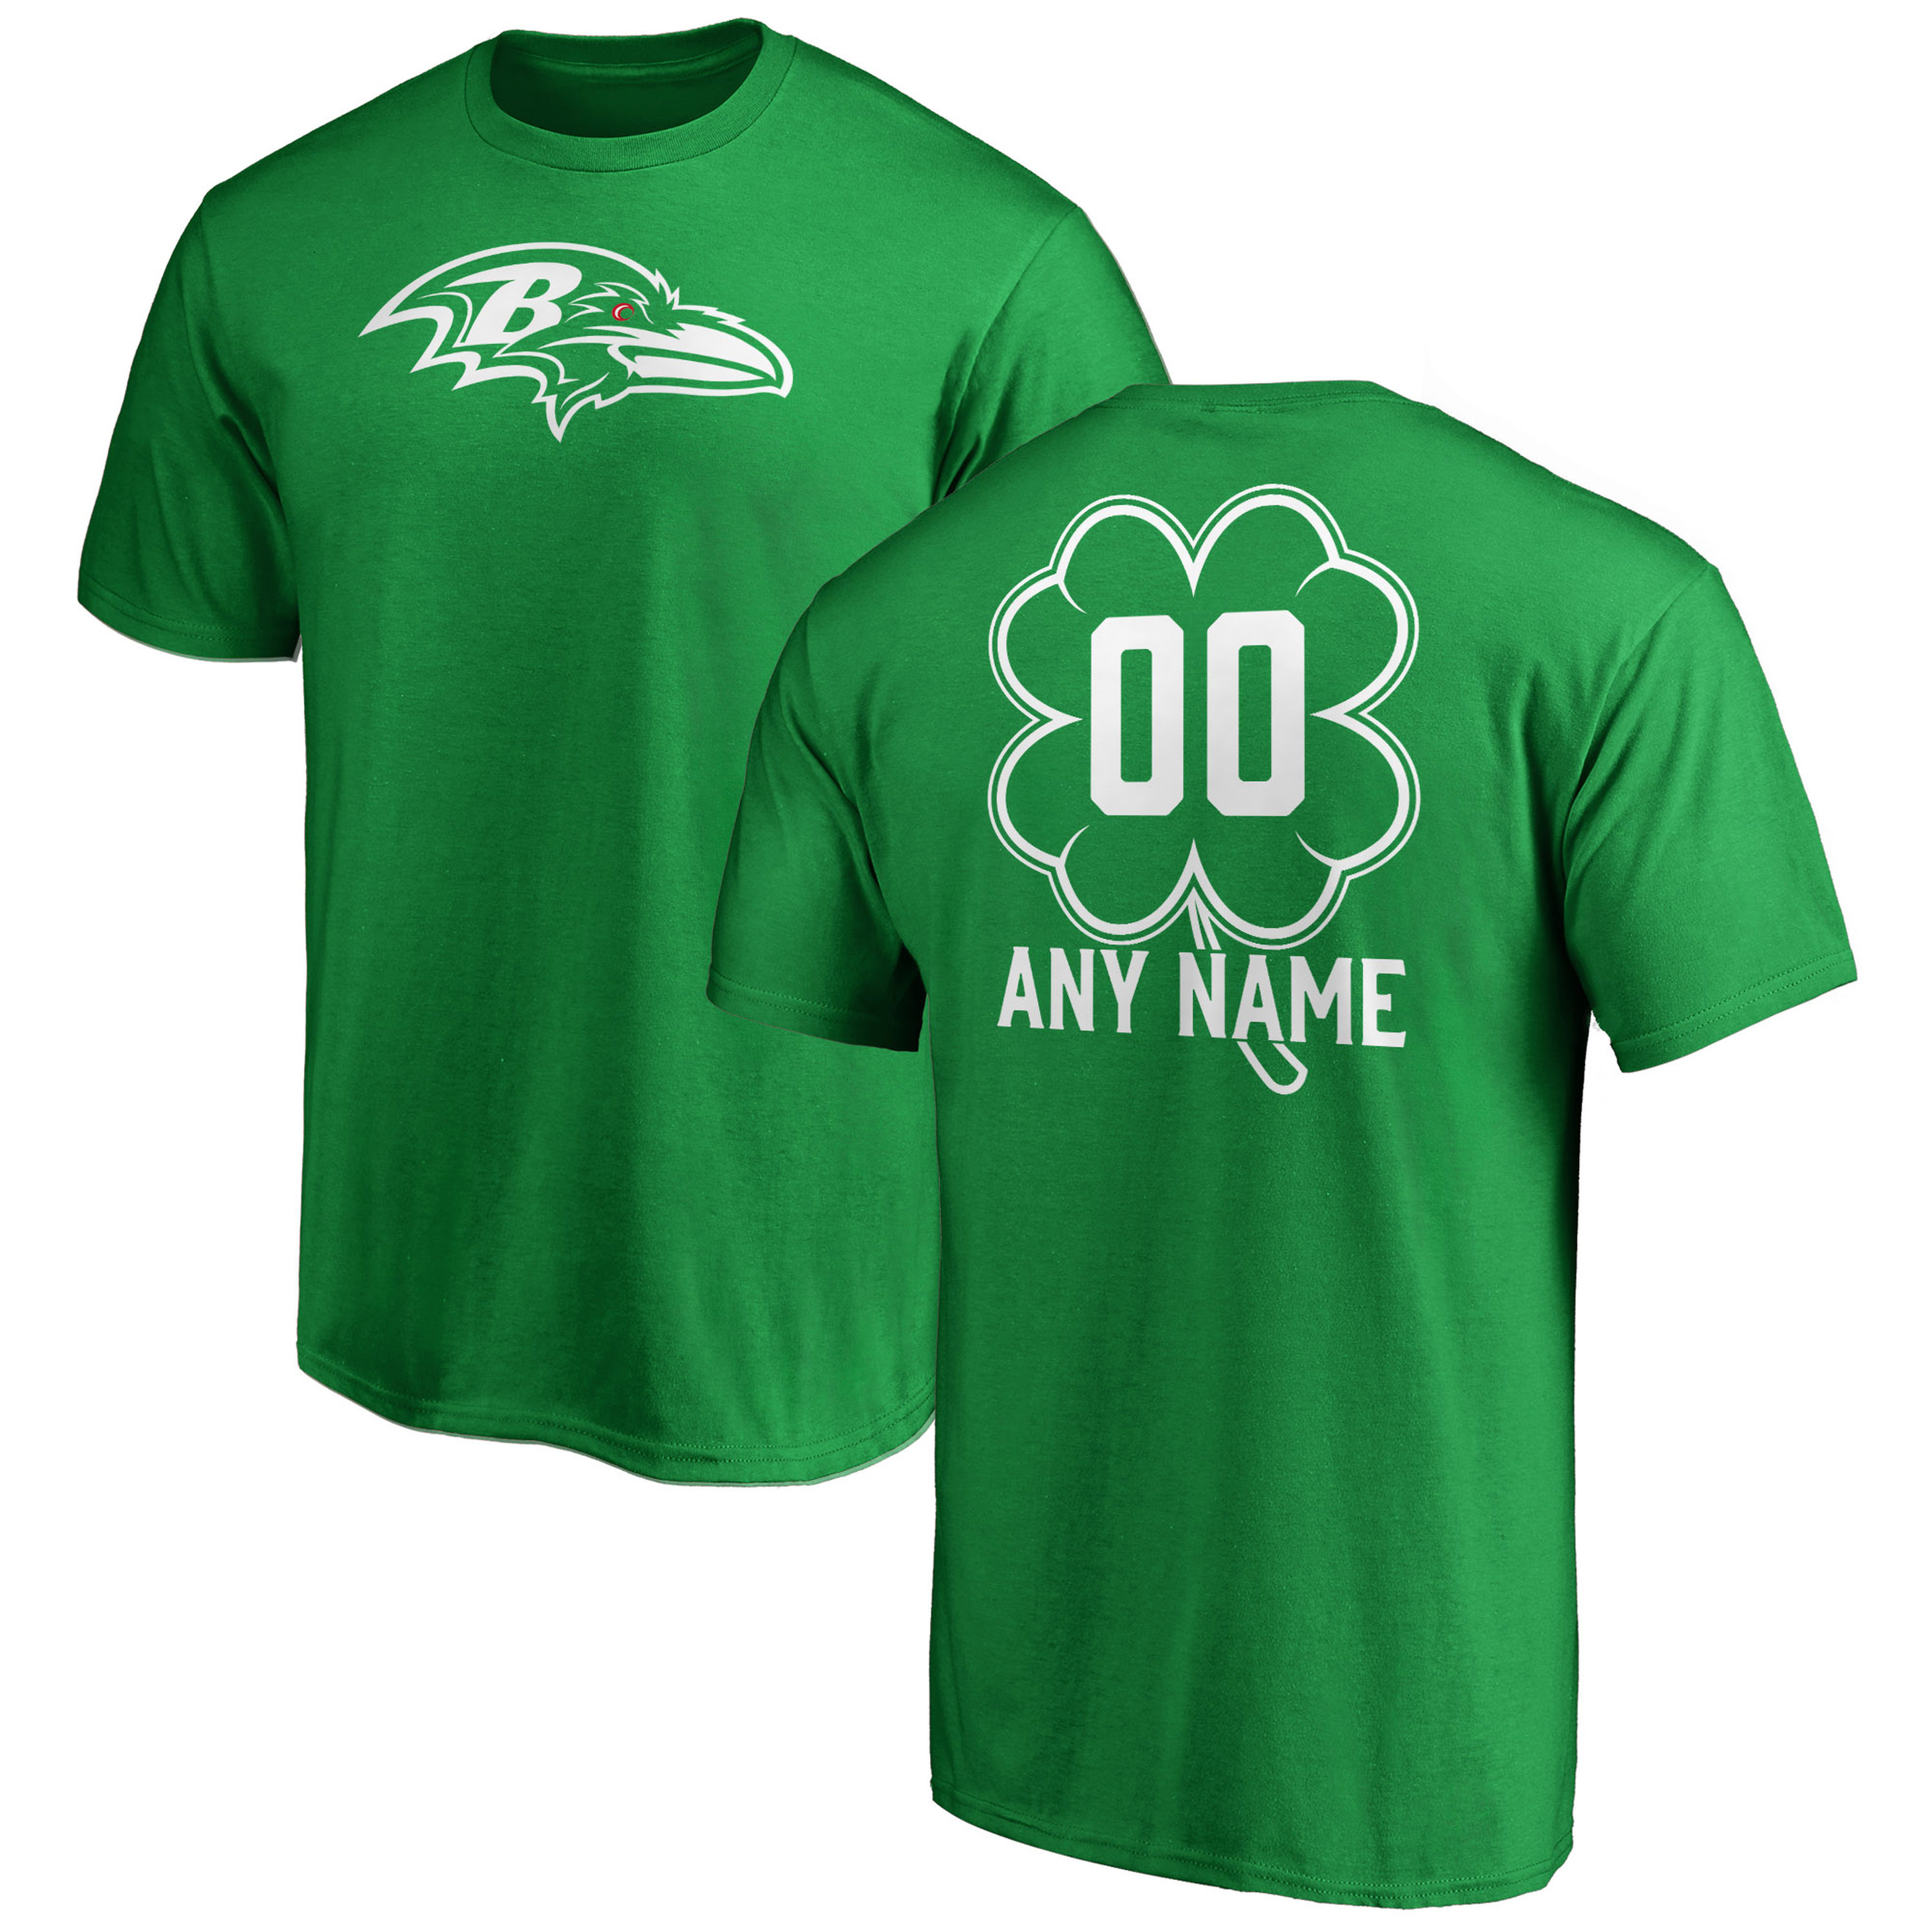 Men's Baltimore Ravens NFL Pro Line by Fanatics Branded Kelly Green St. Patrick's Day Personalized Name & Number T-Shirt